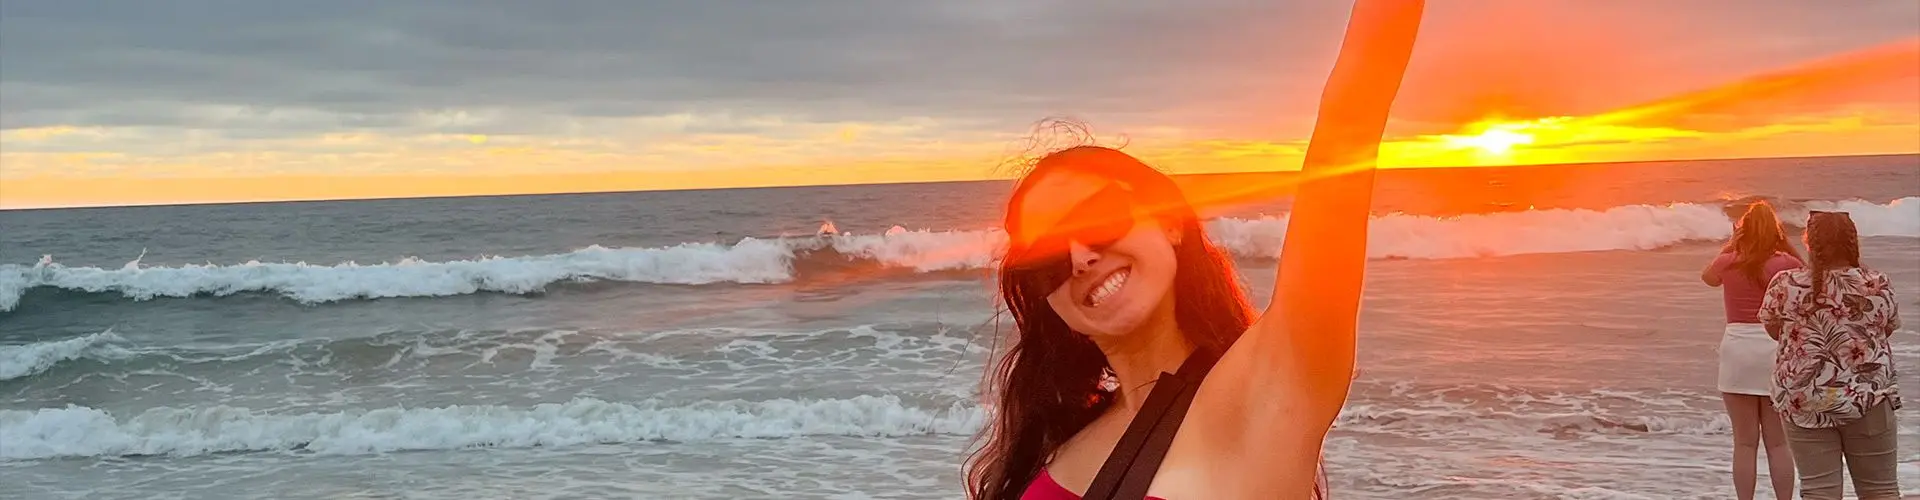 Girl with sunglasses standing with her arm raised on a beach with waves and sunset in the background